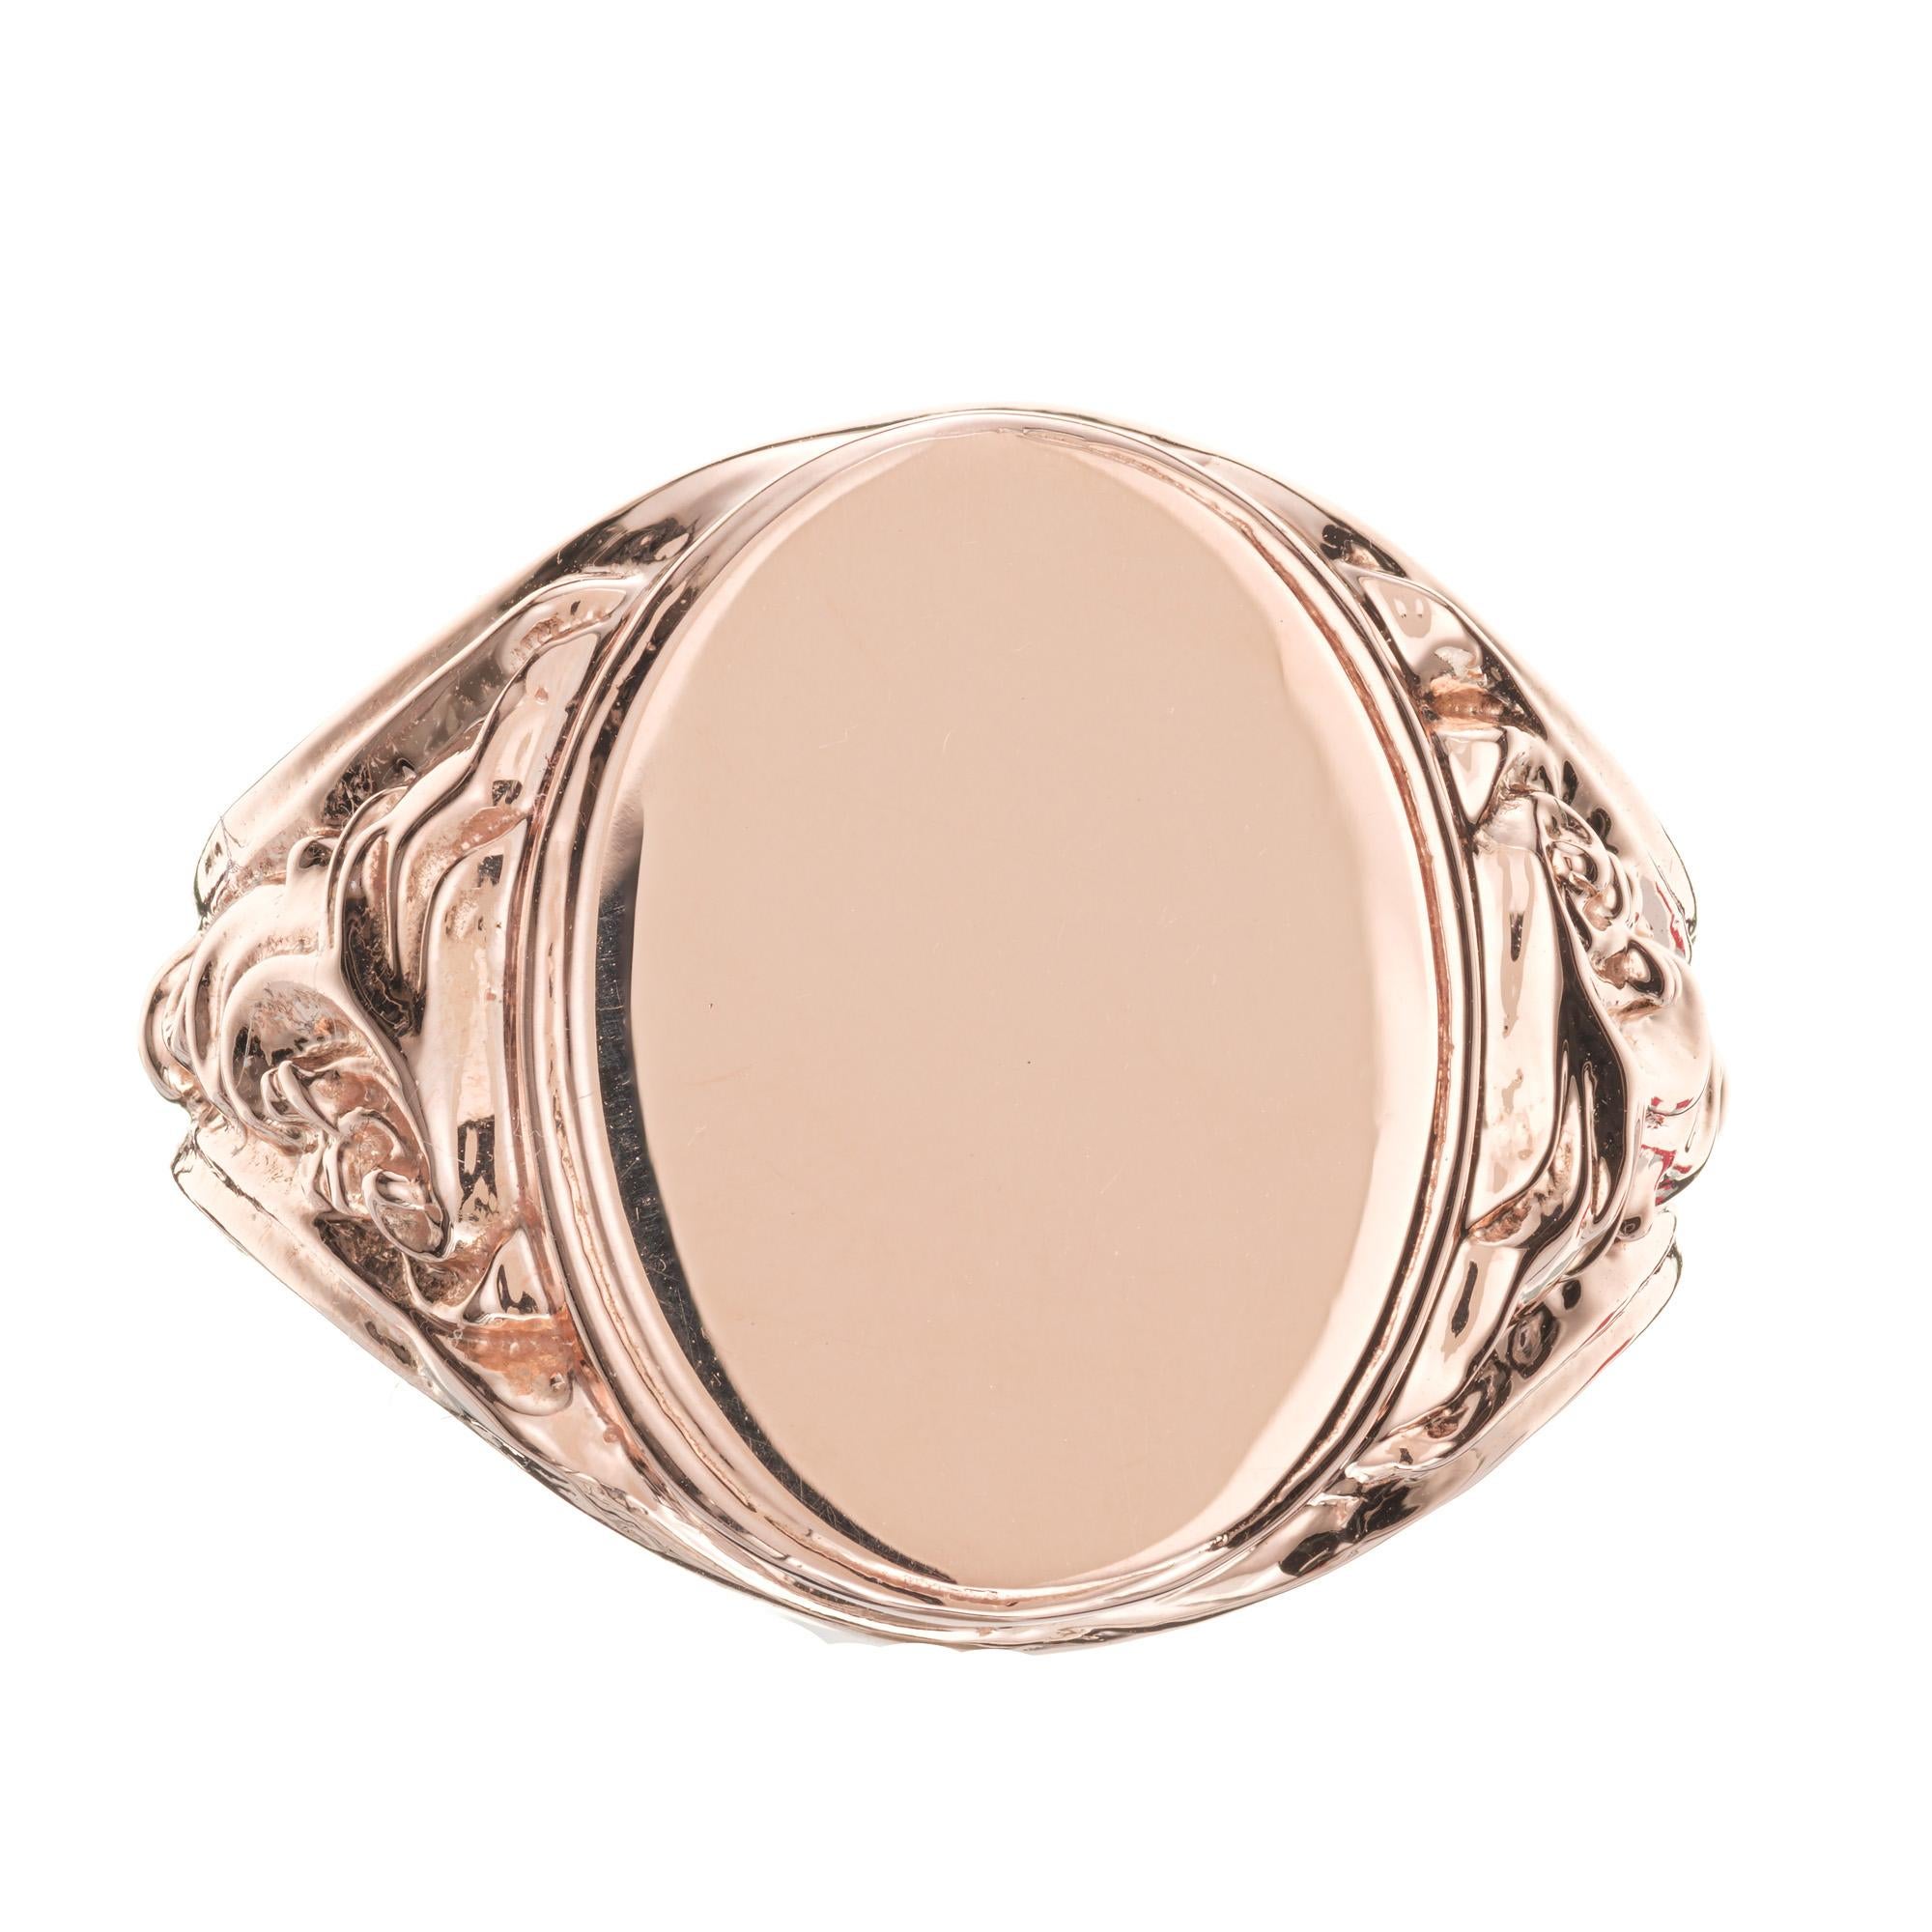 Vintage Inspired solid 14k rose gold signet ring. This is a replica of an 1880's Men's signet ring. Designed and crafted in the Peter Suchy workshop.

Size 9 and sizable 
14k rose gold 
Stamped: 14k
12.4 grams
Width at top: 17.8mm
Height at top: